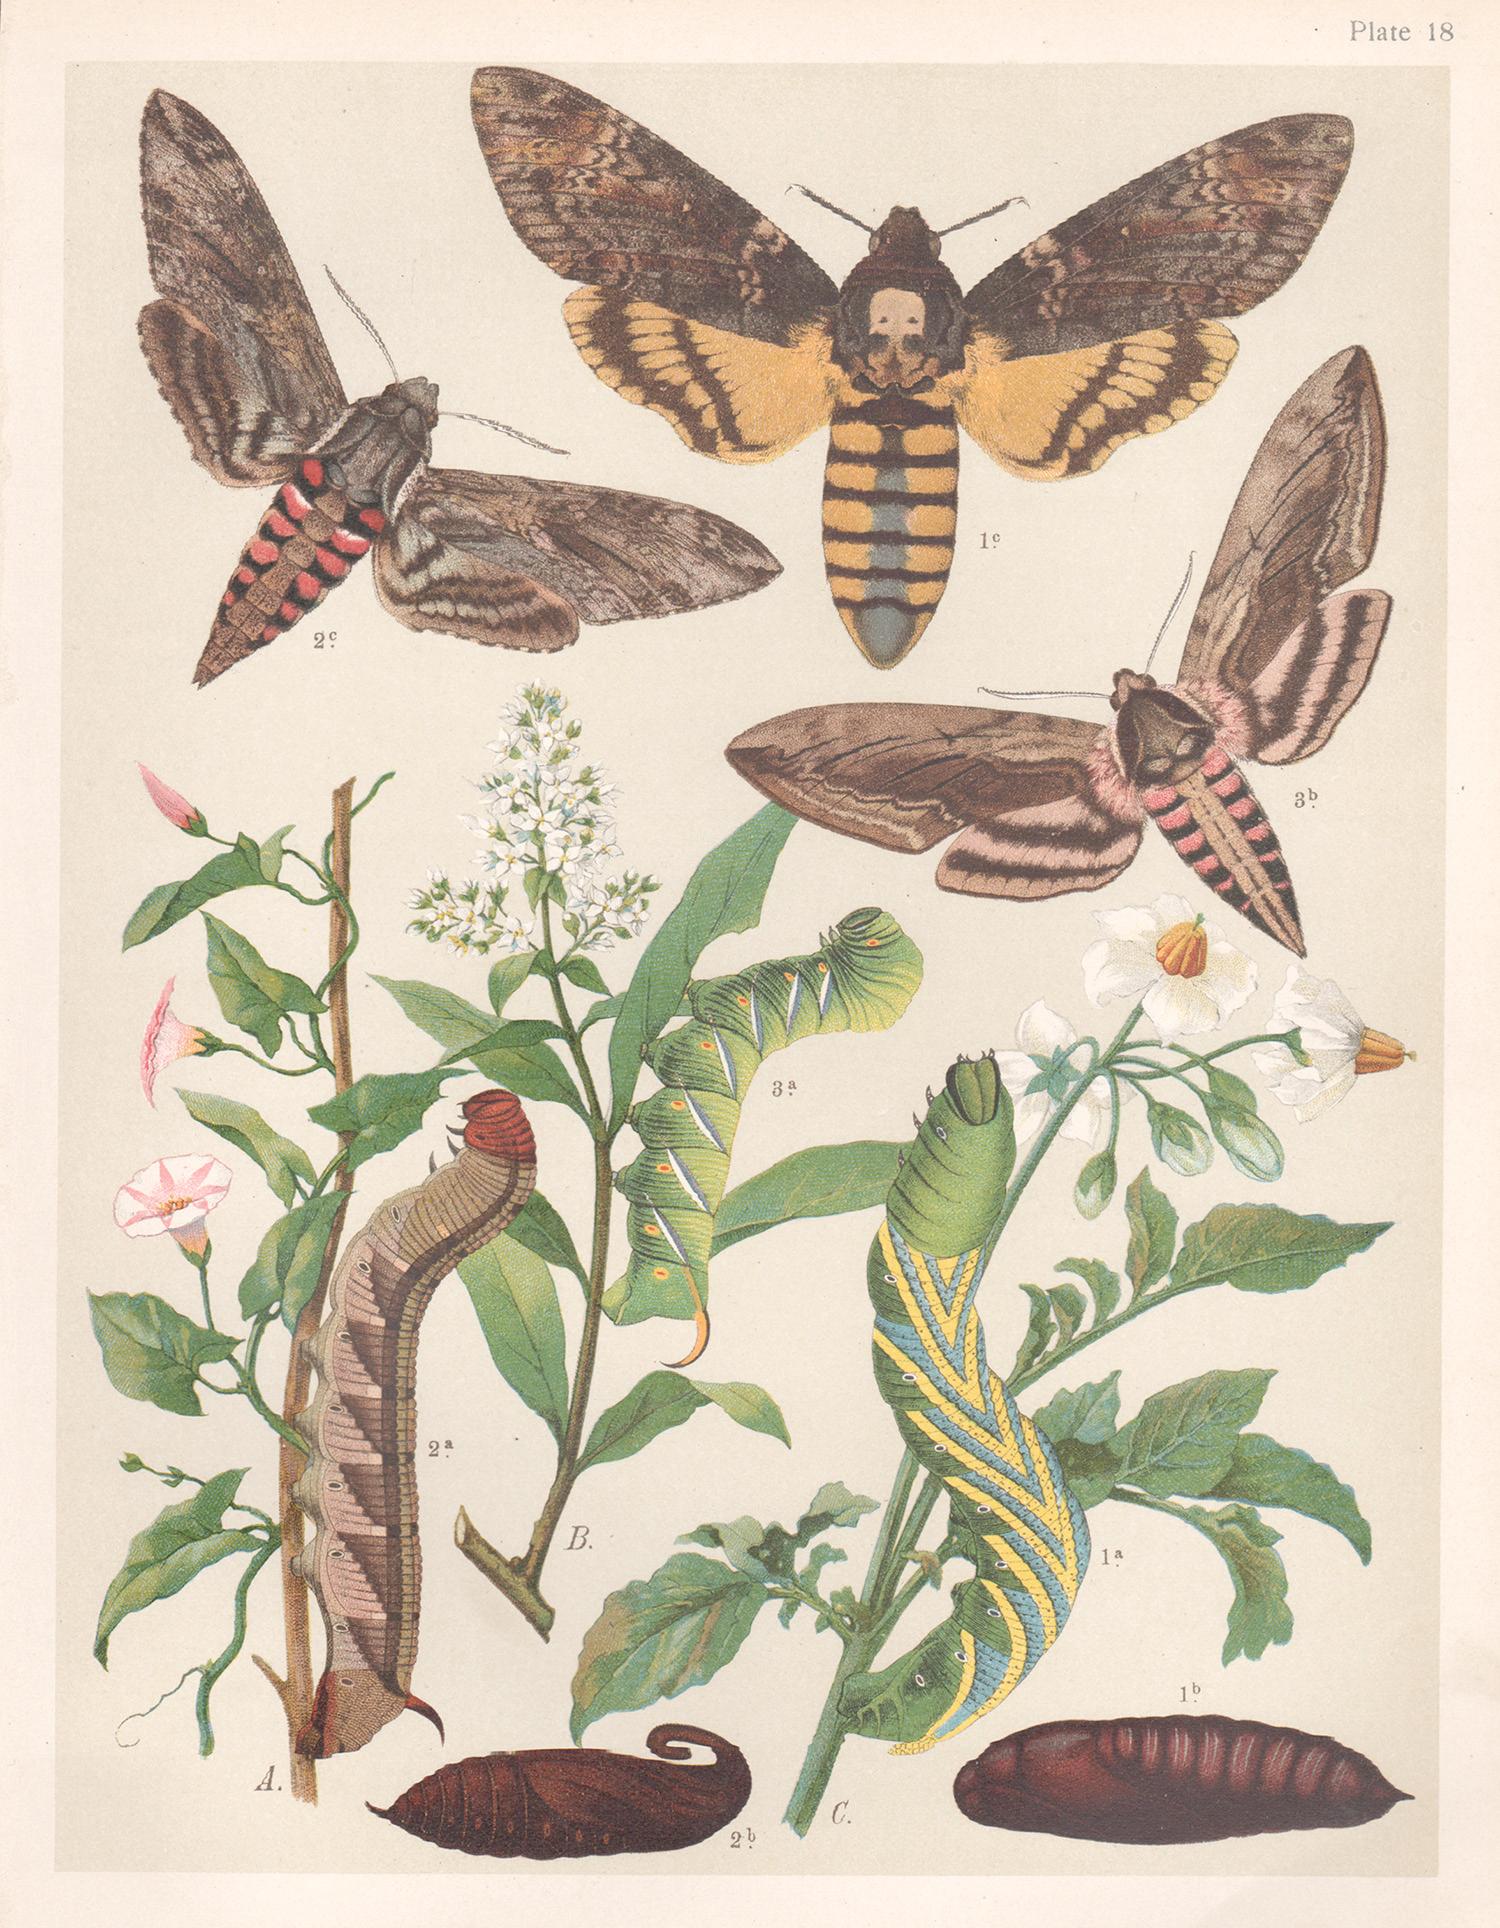 Antique 19th Century Insect Print Butterflies Recently Mounted 9 x 11 Chromolithograph